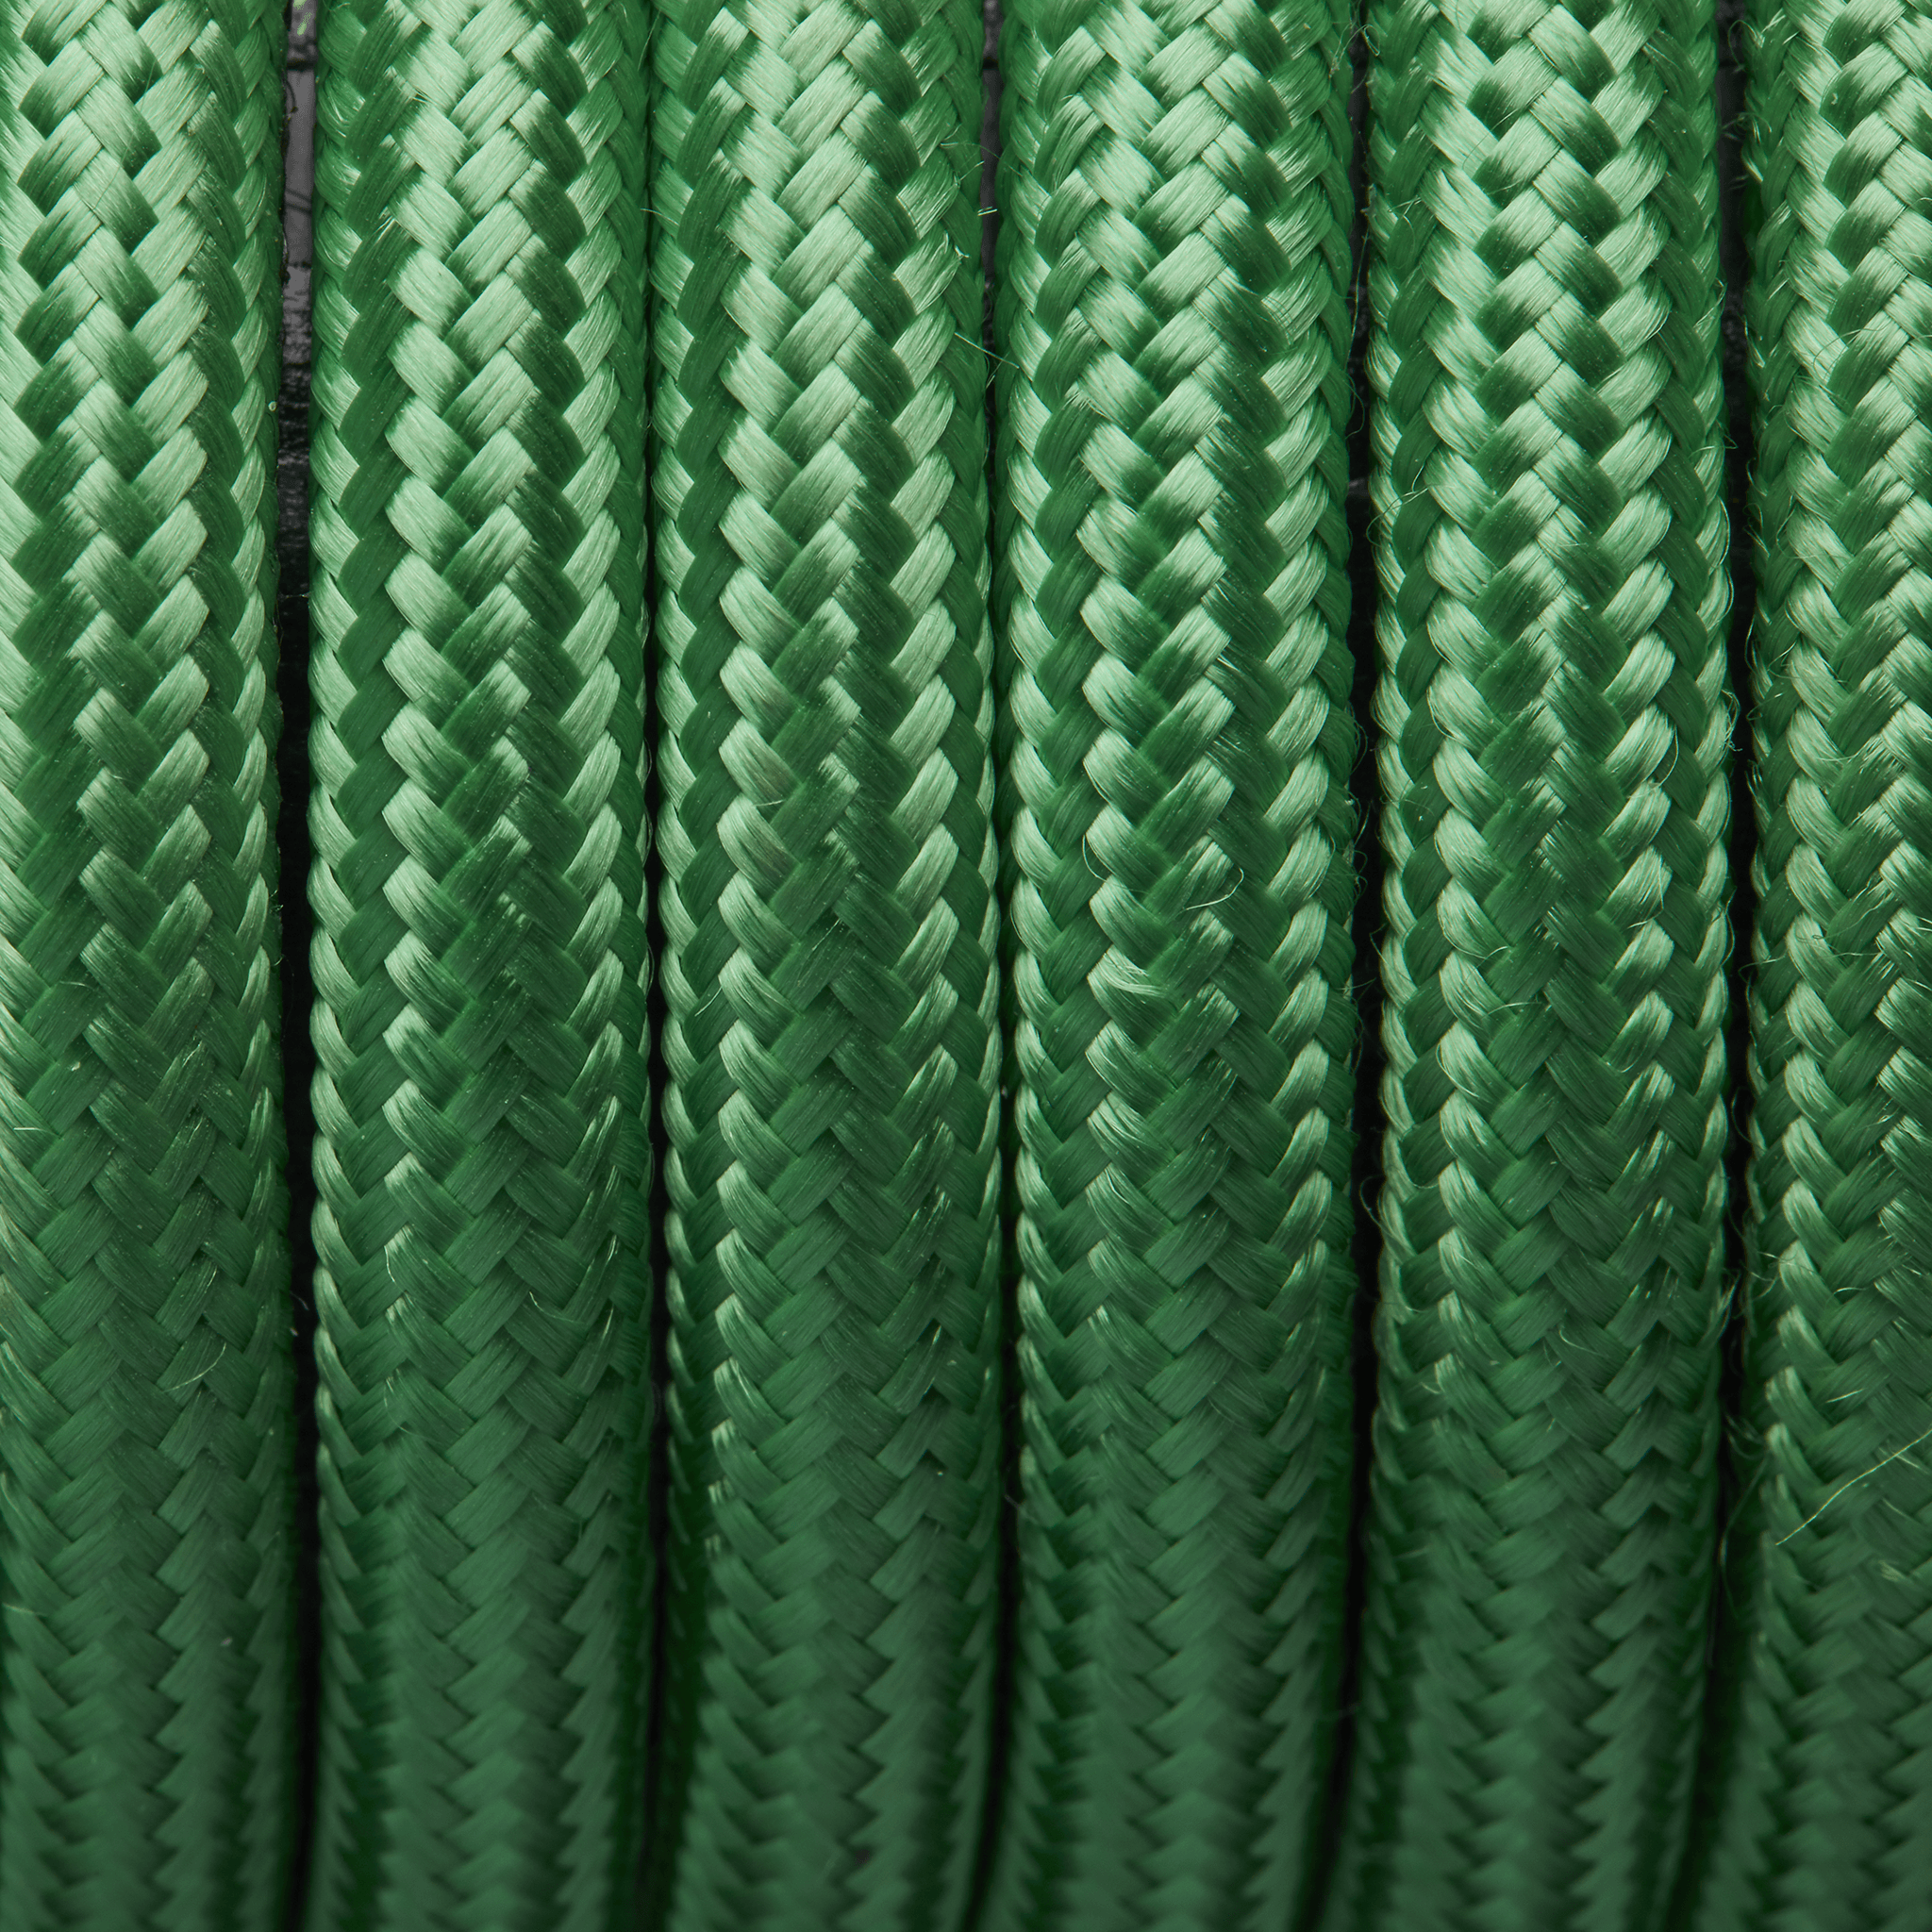 Industville – Round Fabric Flex – Braided Cloth Cable Lighting Wire – Fabric Flex Cable – Green Colour – Braided Woven Cloth Material – 100 CM